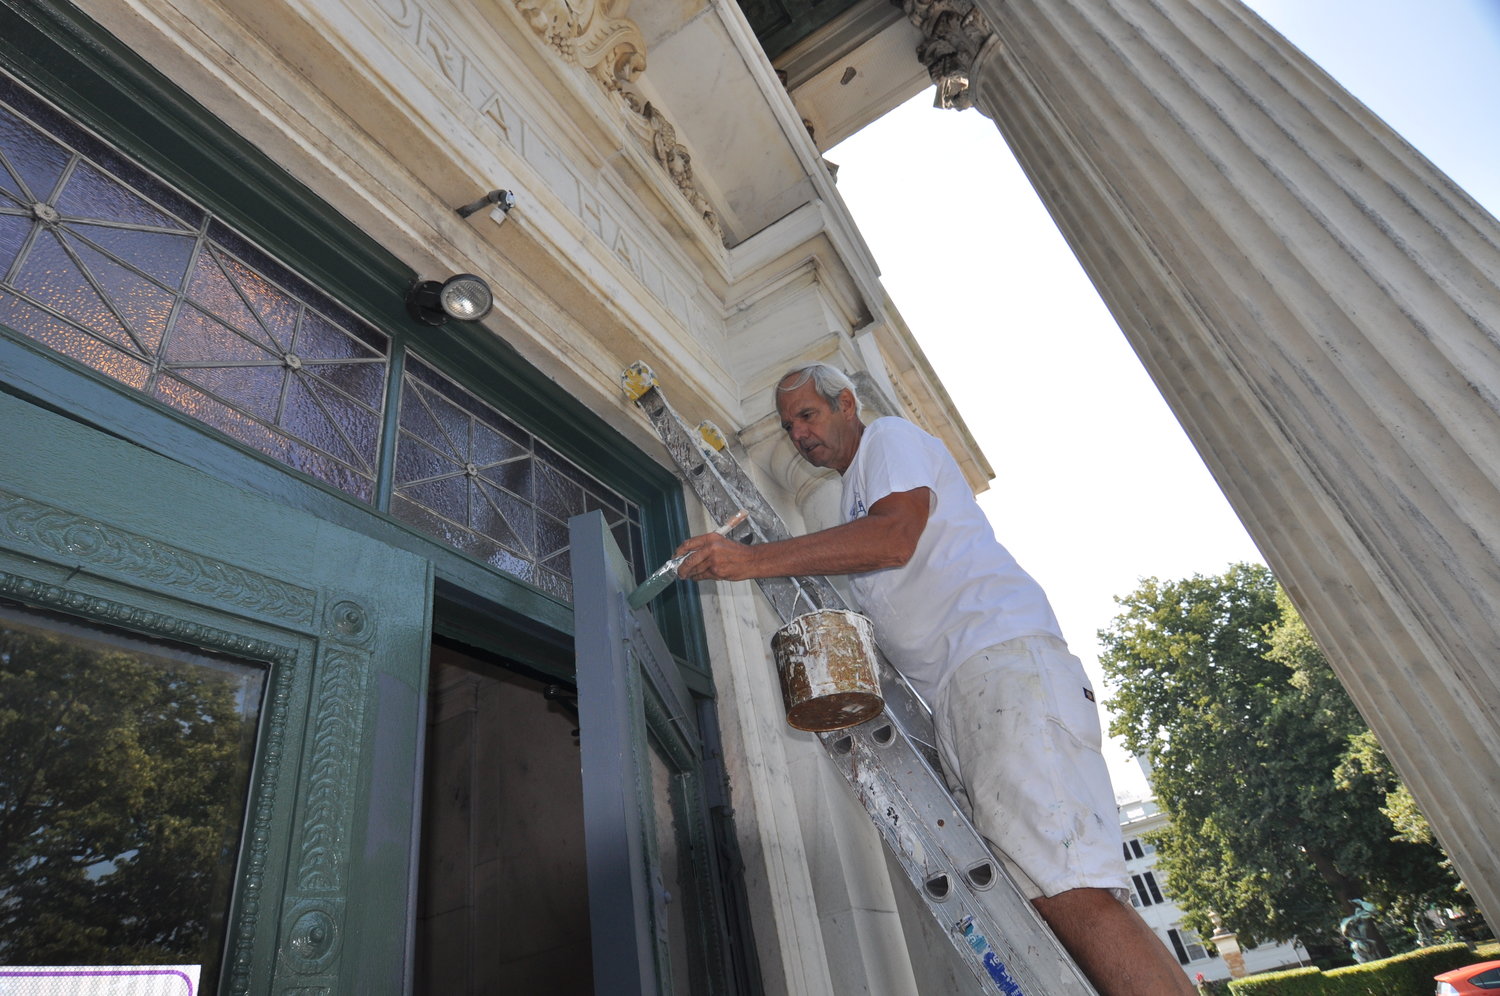 Former Colt Memorial High School basketball star Richard "Stick" Medeiros is always at the top his game, including painting the exterior of the school he once represented.